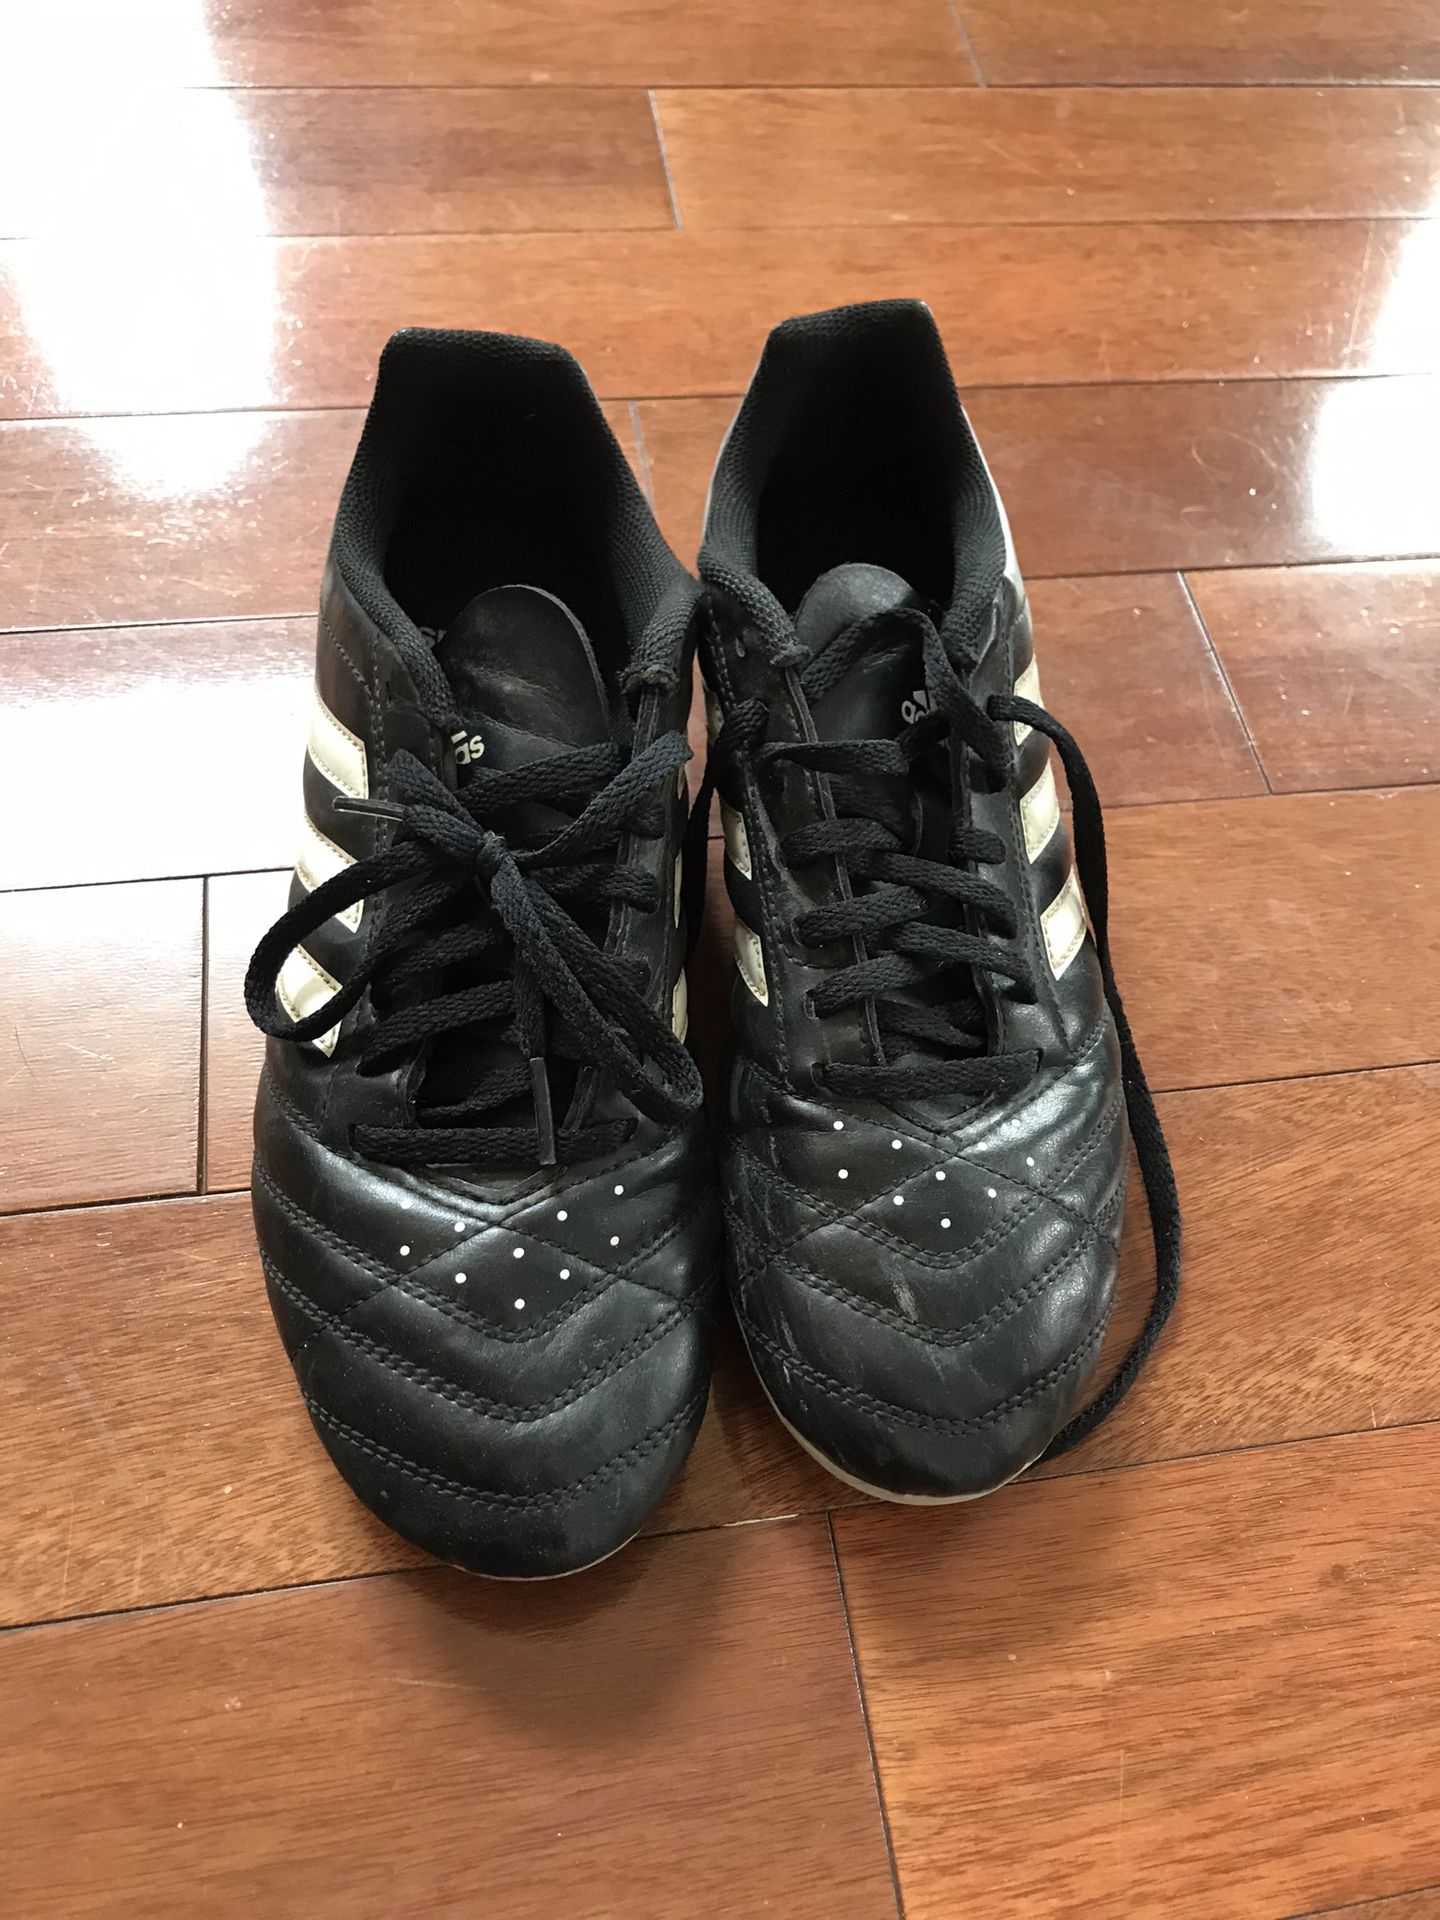 Soccer cleats size 7